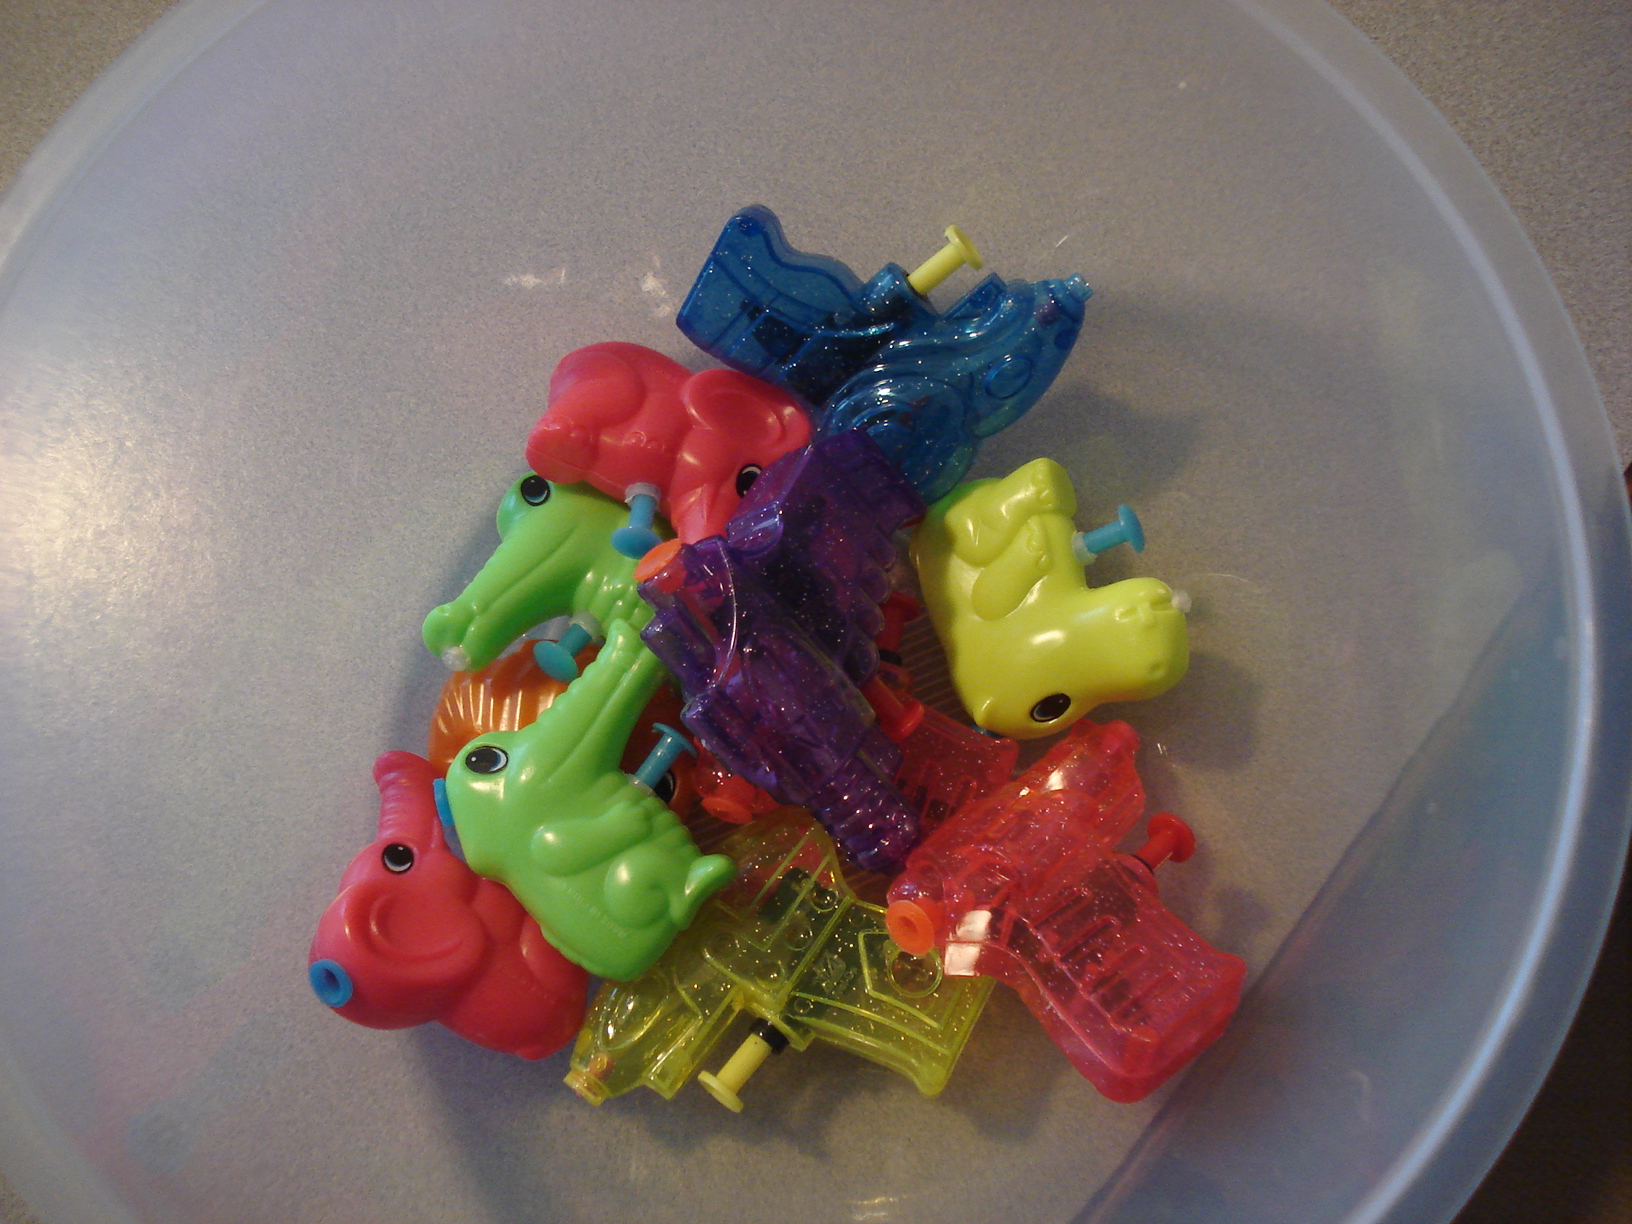 a bowl full of small plastic toys including a bus and a bear